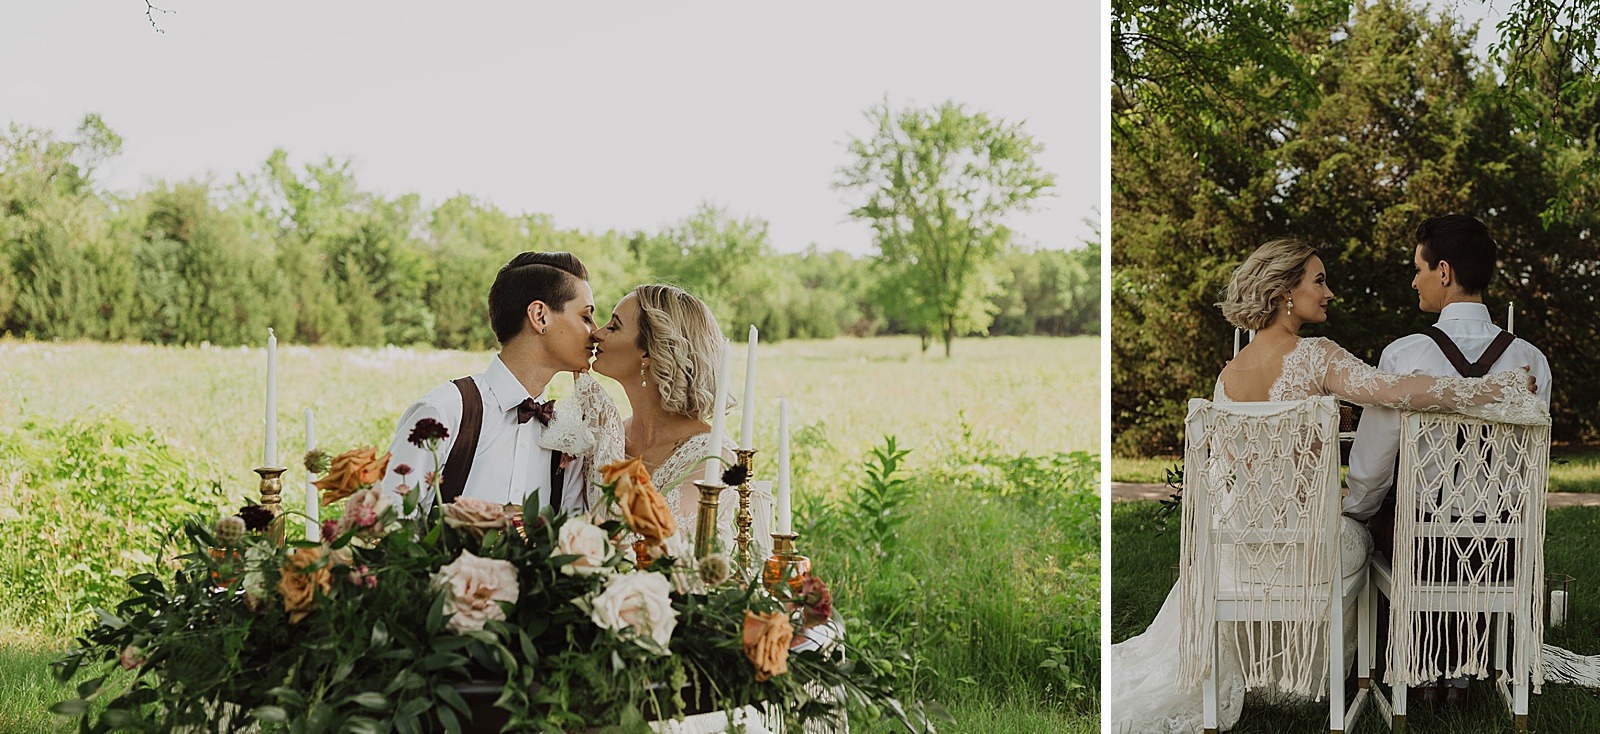 Sweetheart table Boho Kansas City Styled Elopement captured by Caitlyn Cloud Photography